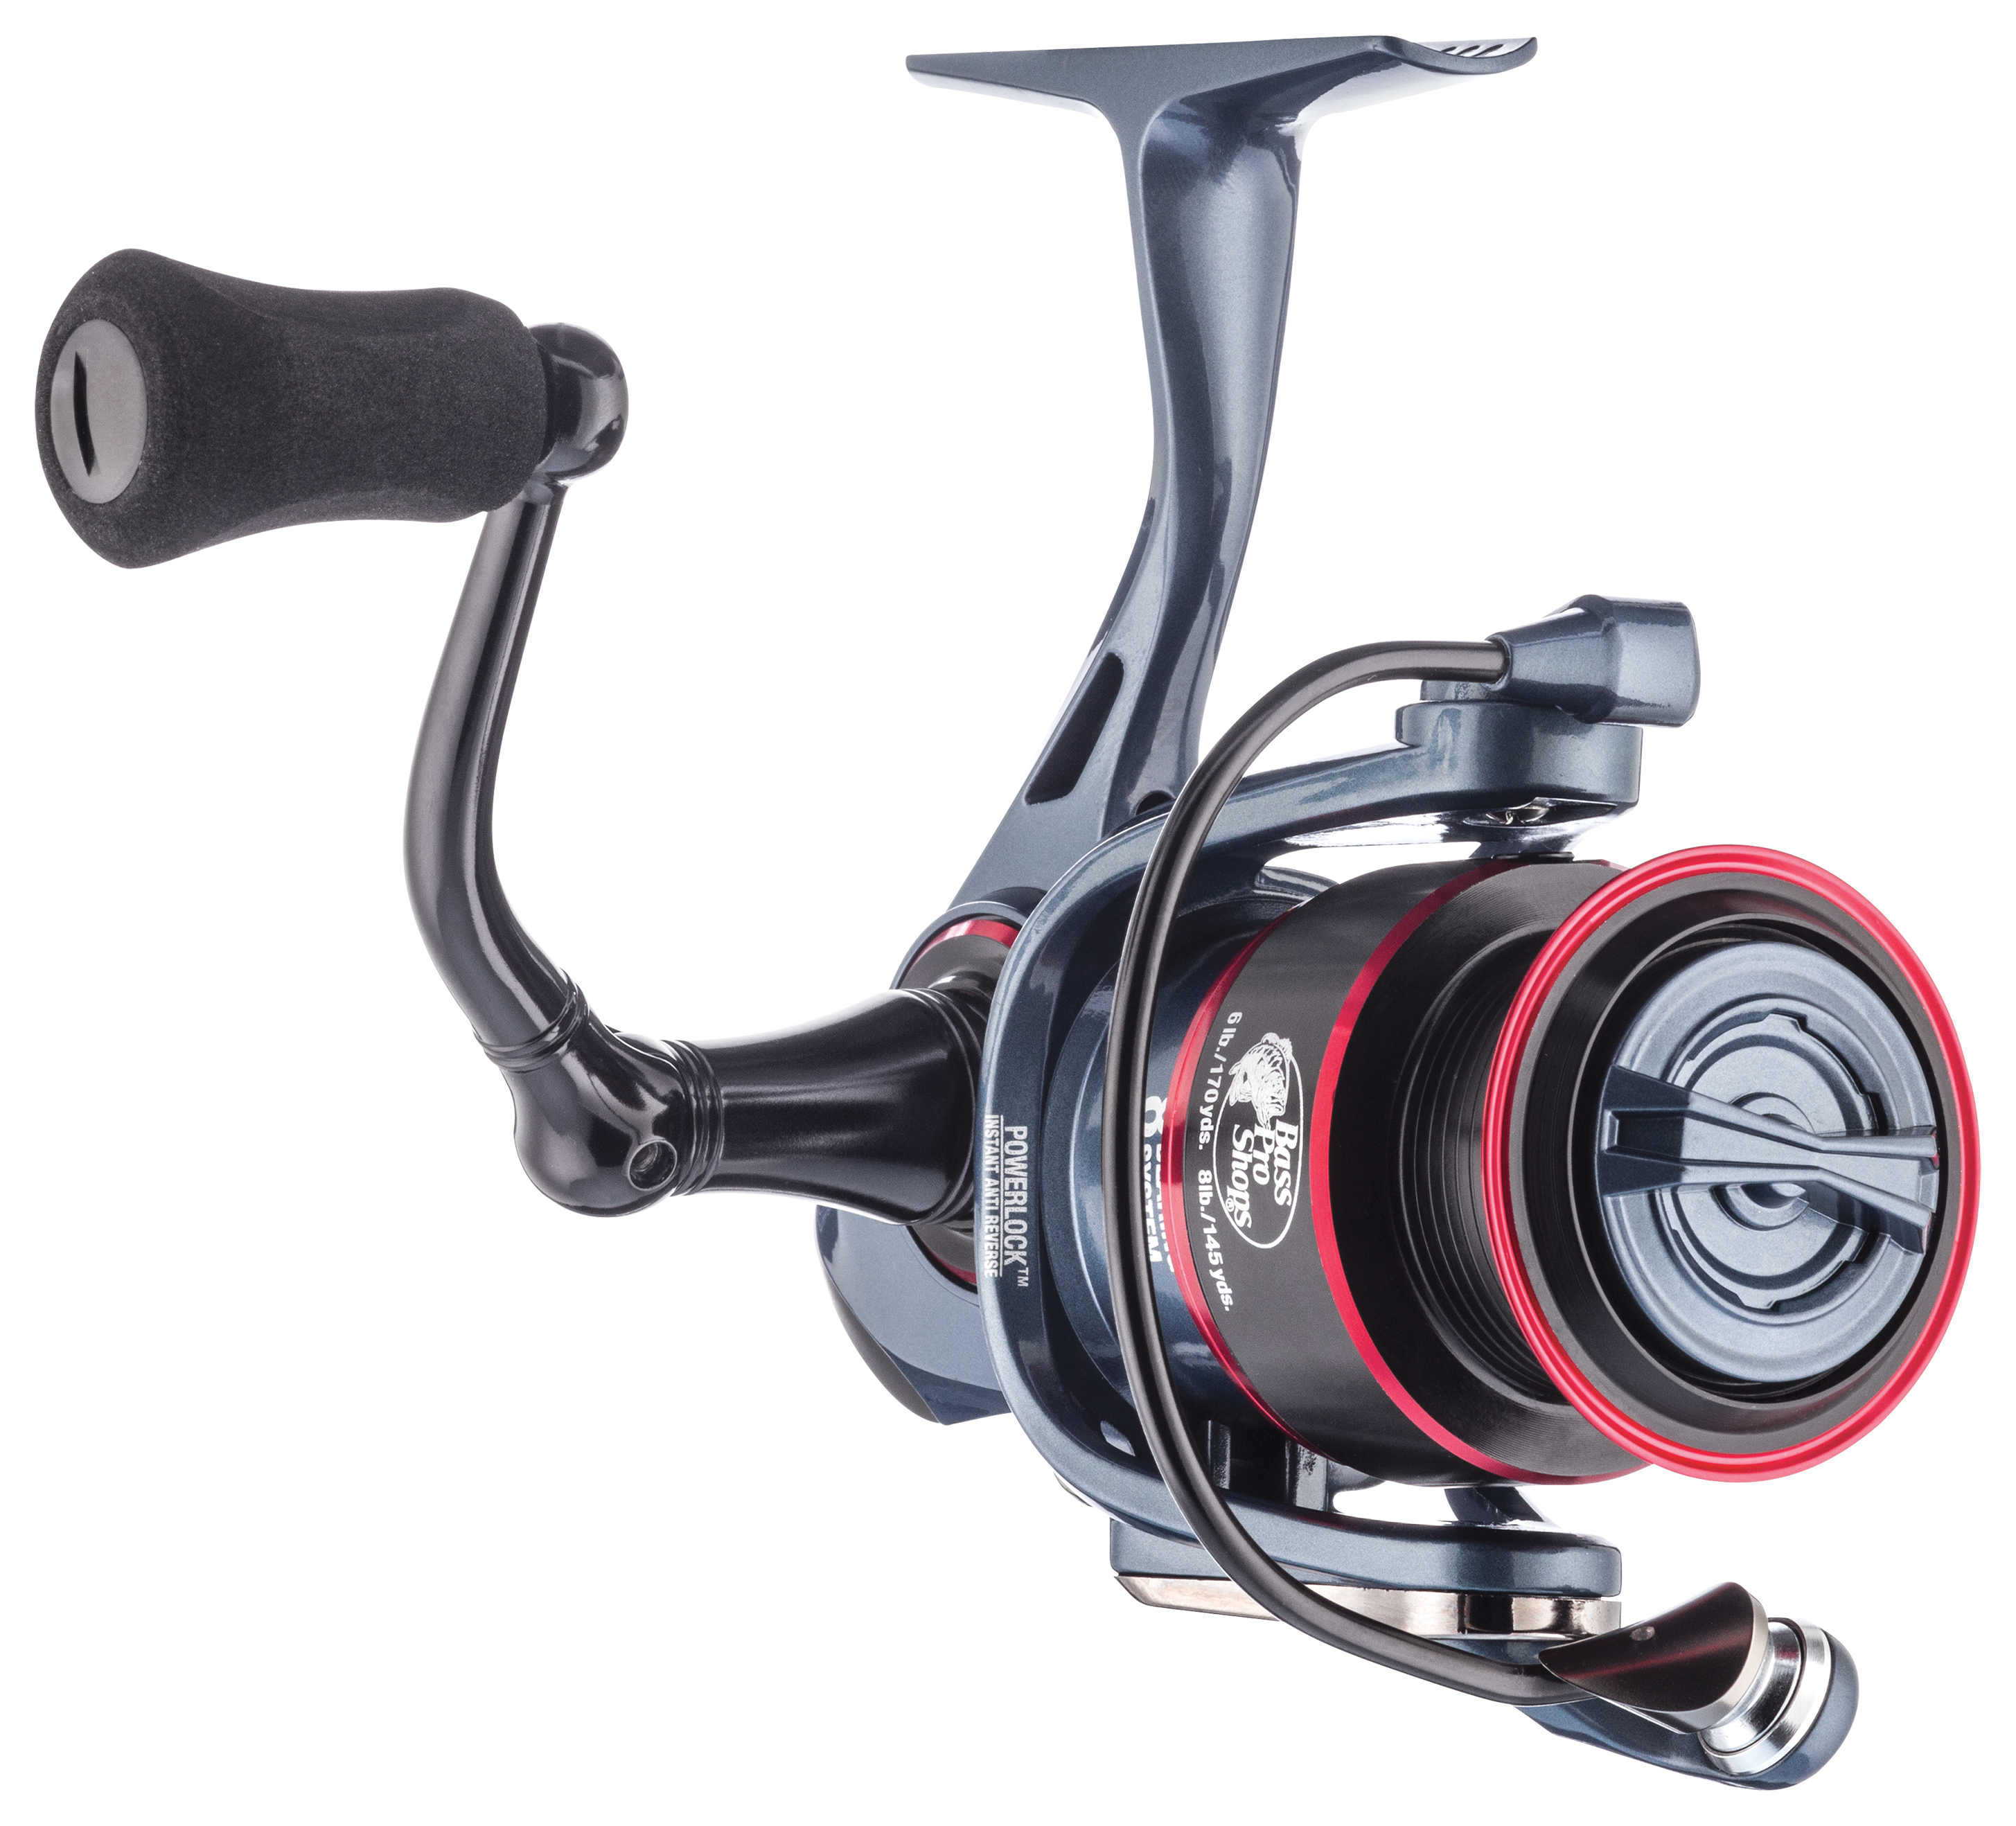 Bass Pro Shops Pro Qualifier Spinning Reel Fights Fish and Annoyances Like  Line Twist and Line Wear